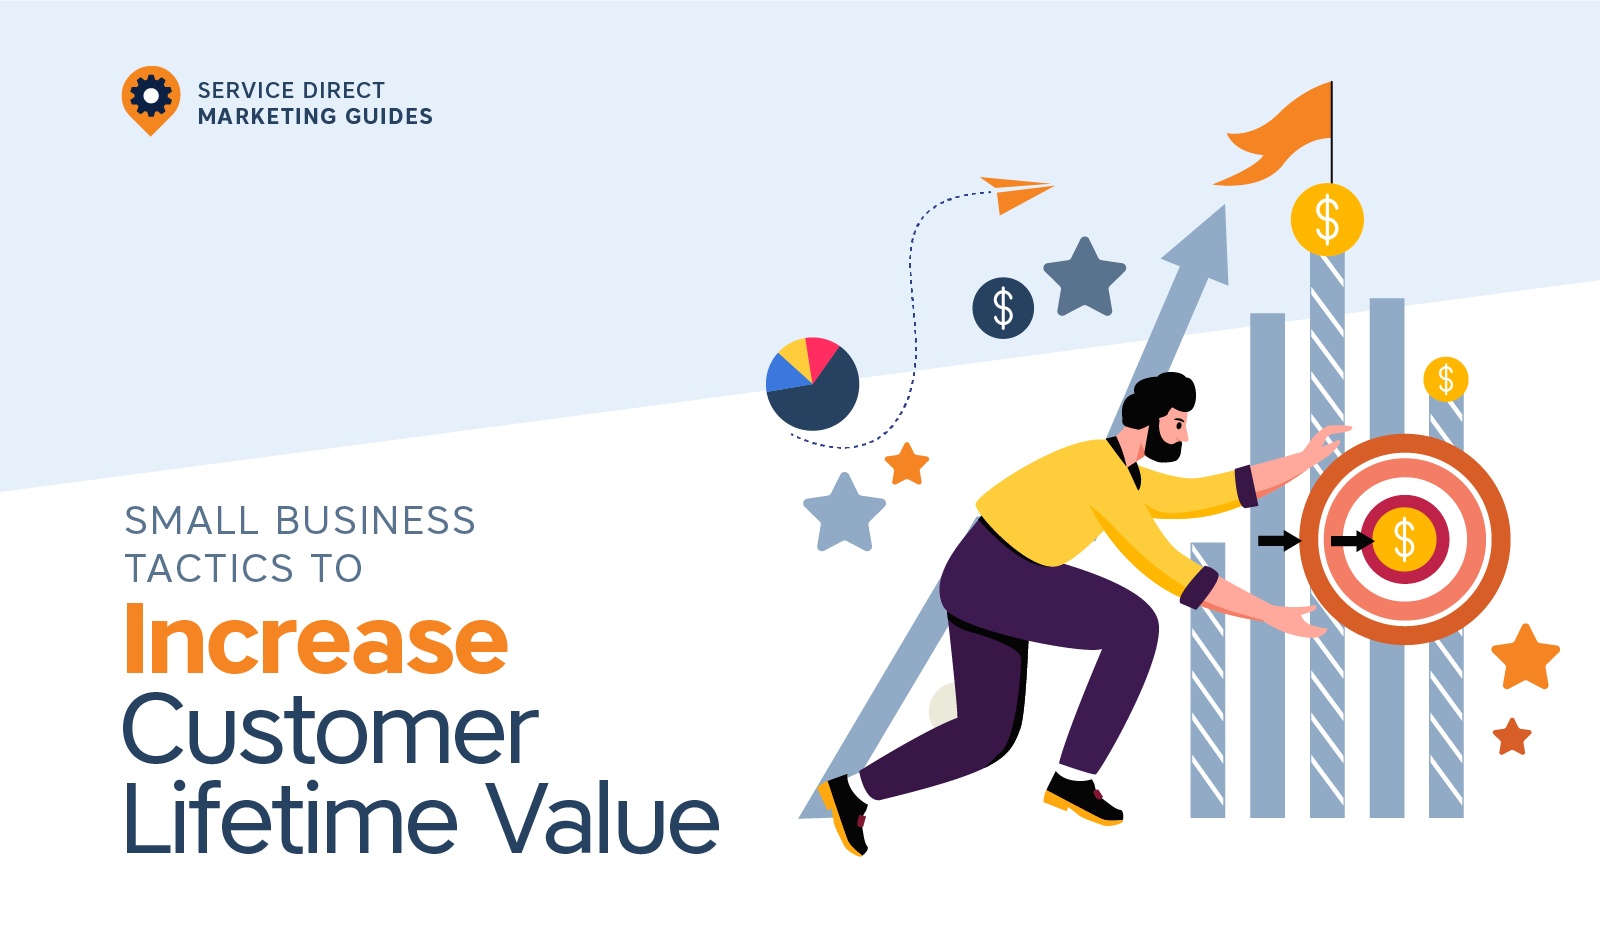 Small Business Tactics to Increase Customer Lifetime Value